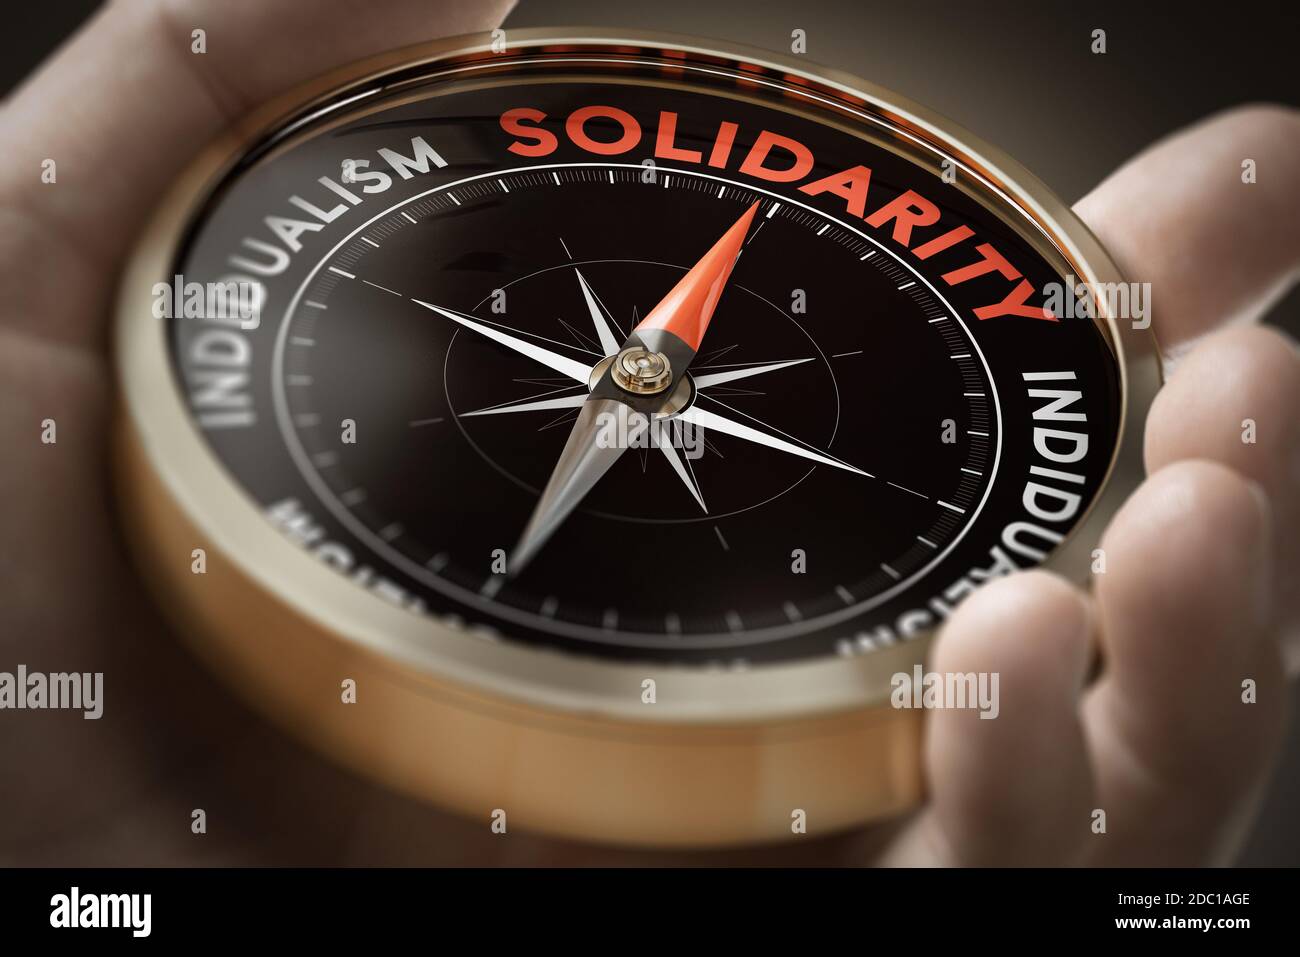 Man hand holding compass with needle pointing the word solidarity. Sociology concept. Composite image between a hand photography and a 3D background. Stock Photo